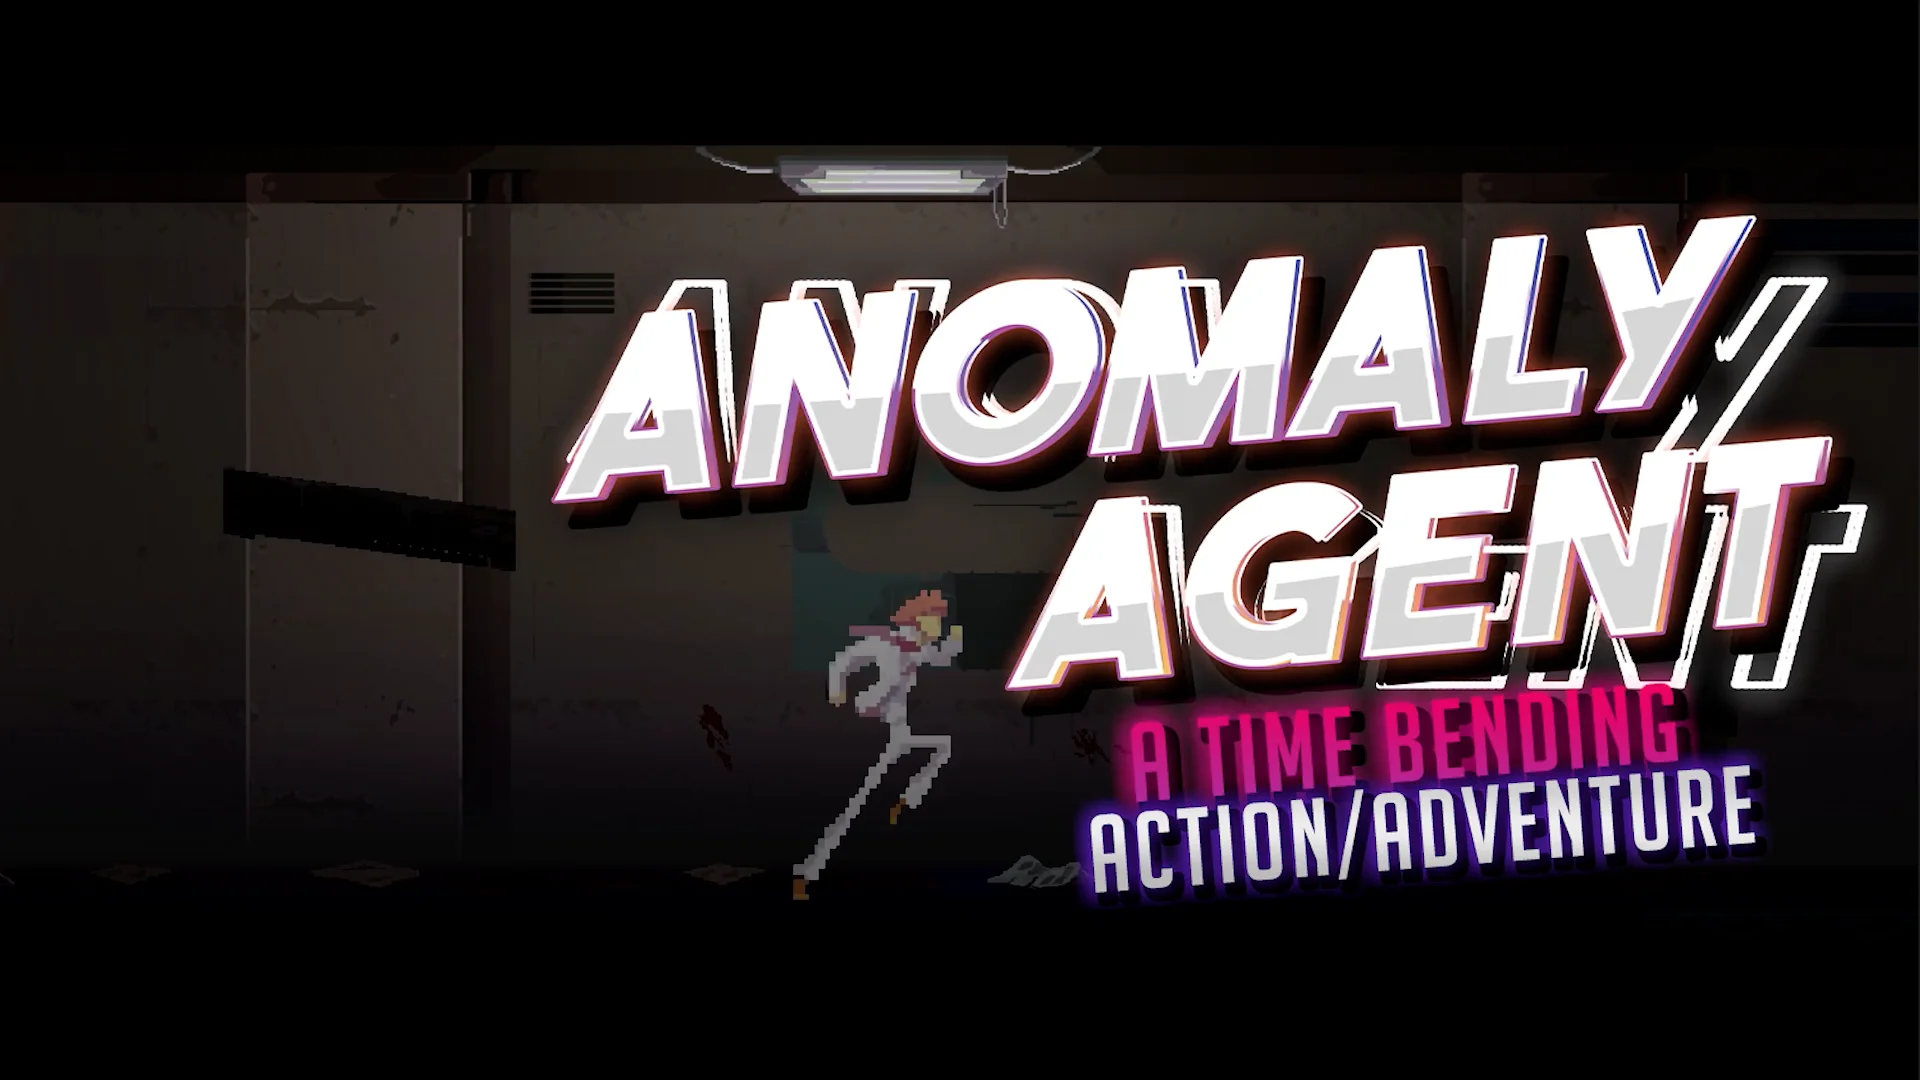 Anomaly Agent - trailer on Vimeo